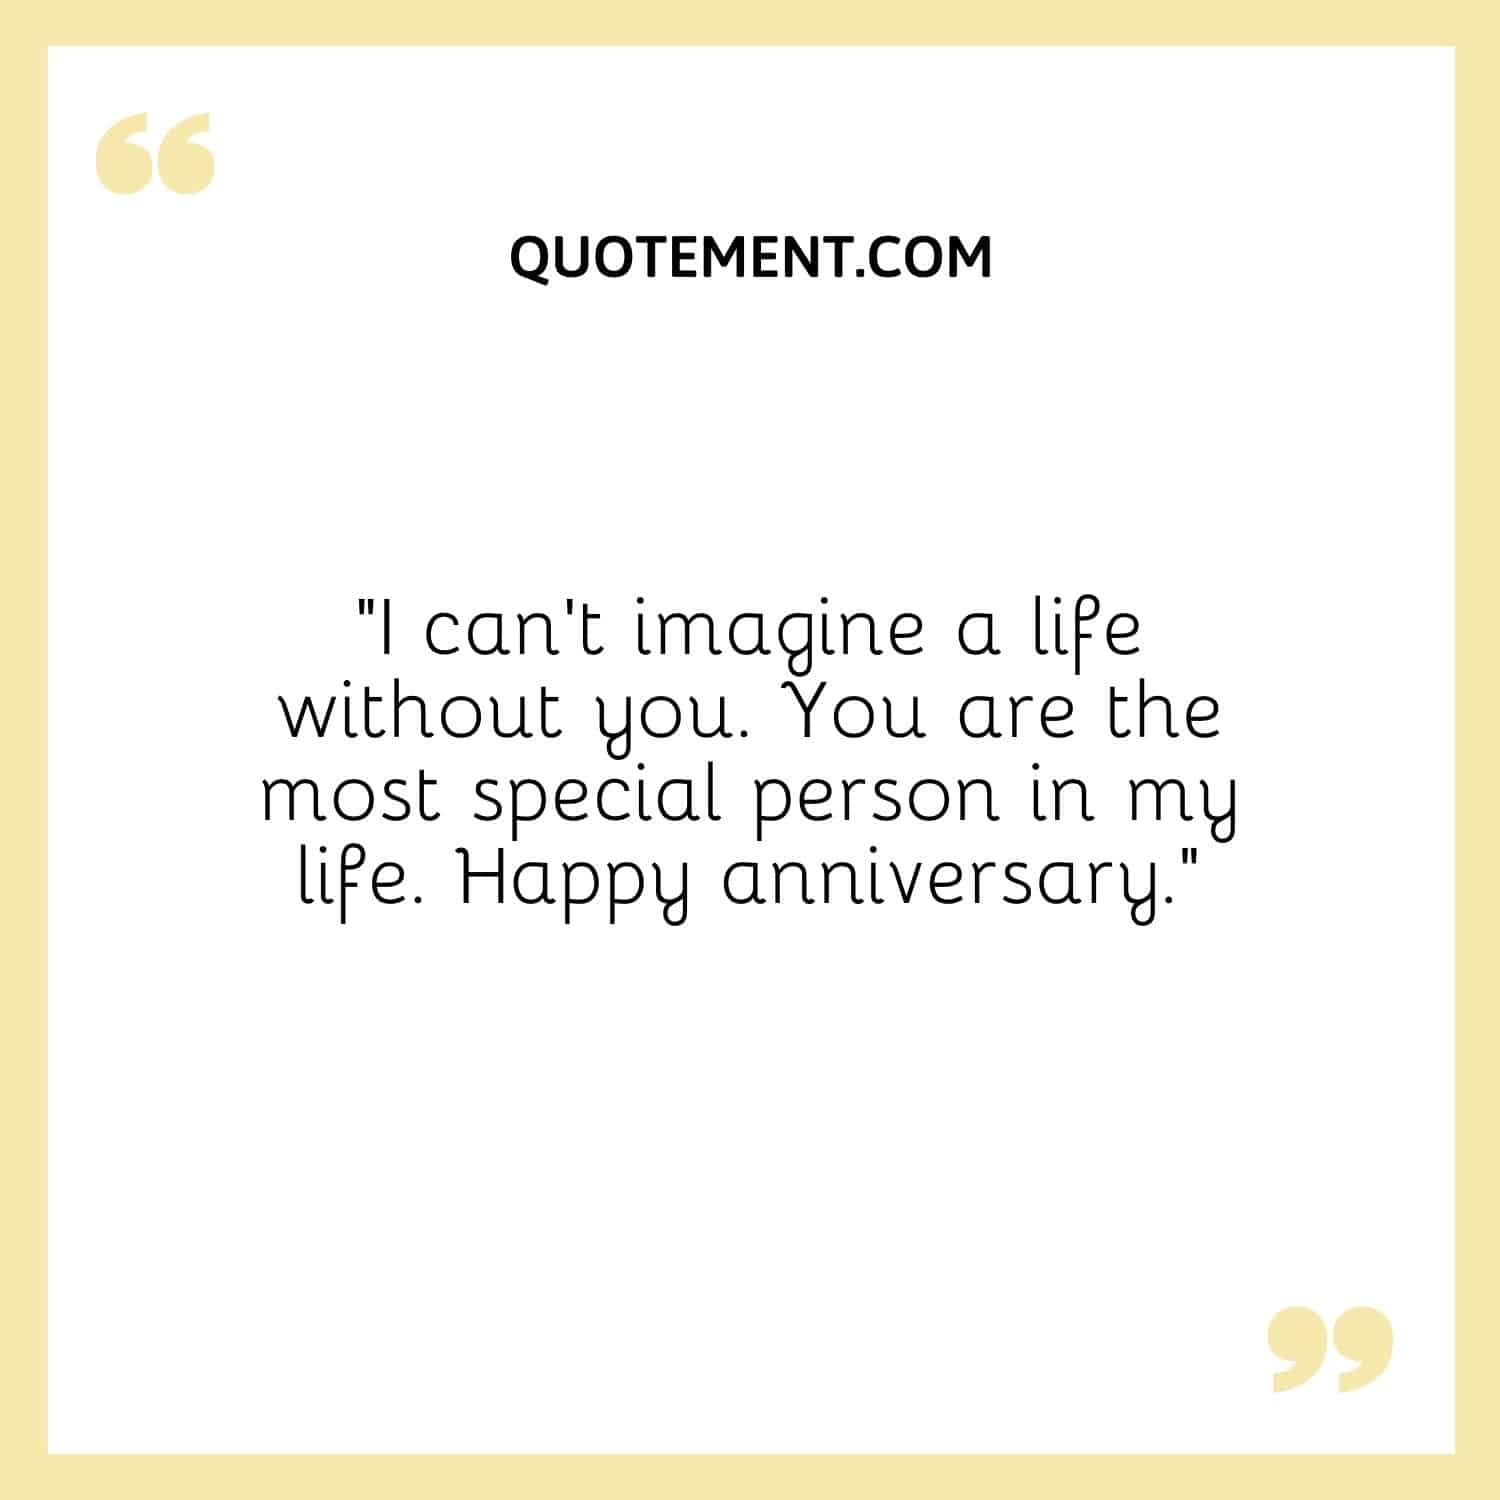 “I can’t imagine a life without you. You are the most special person in my life. Happy anniversary.”